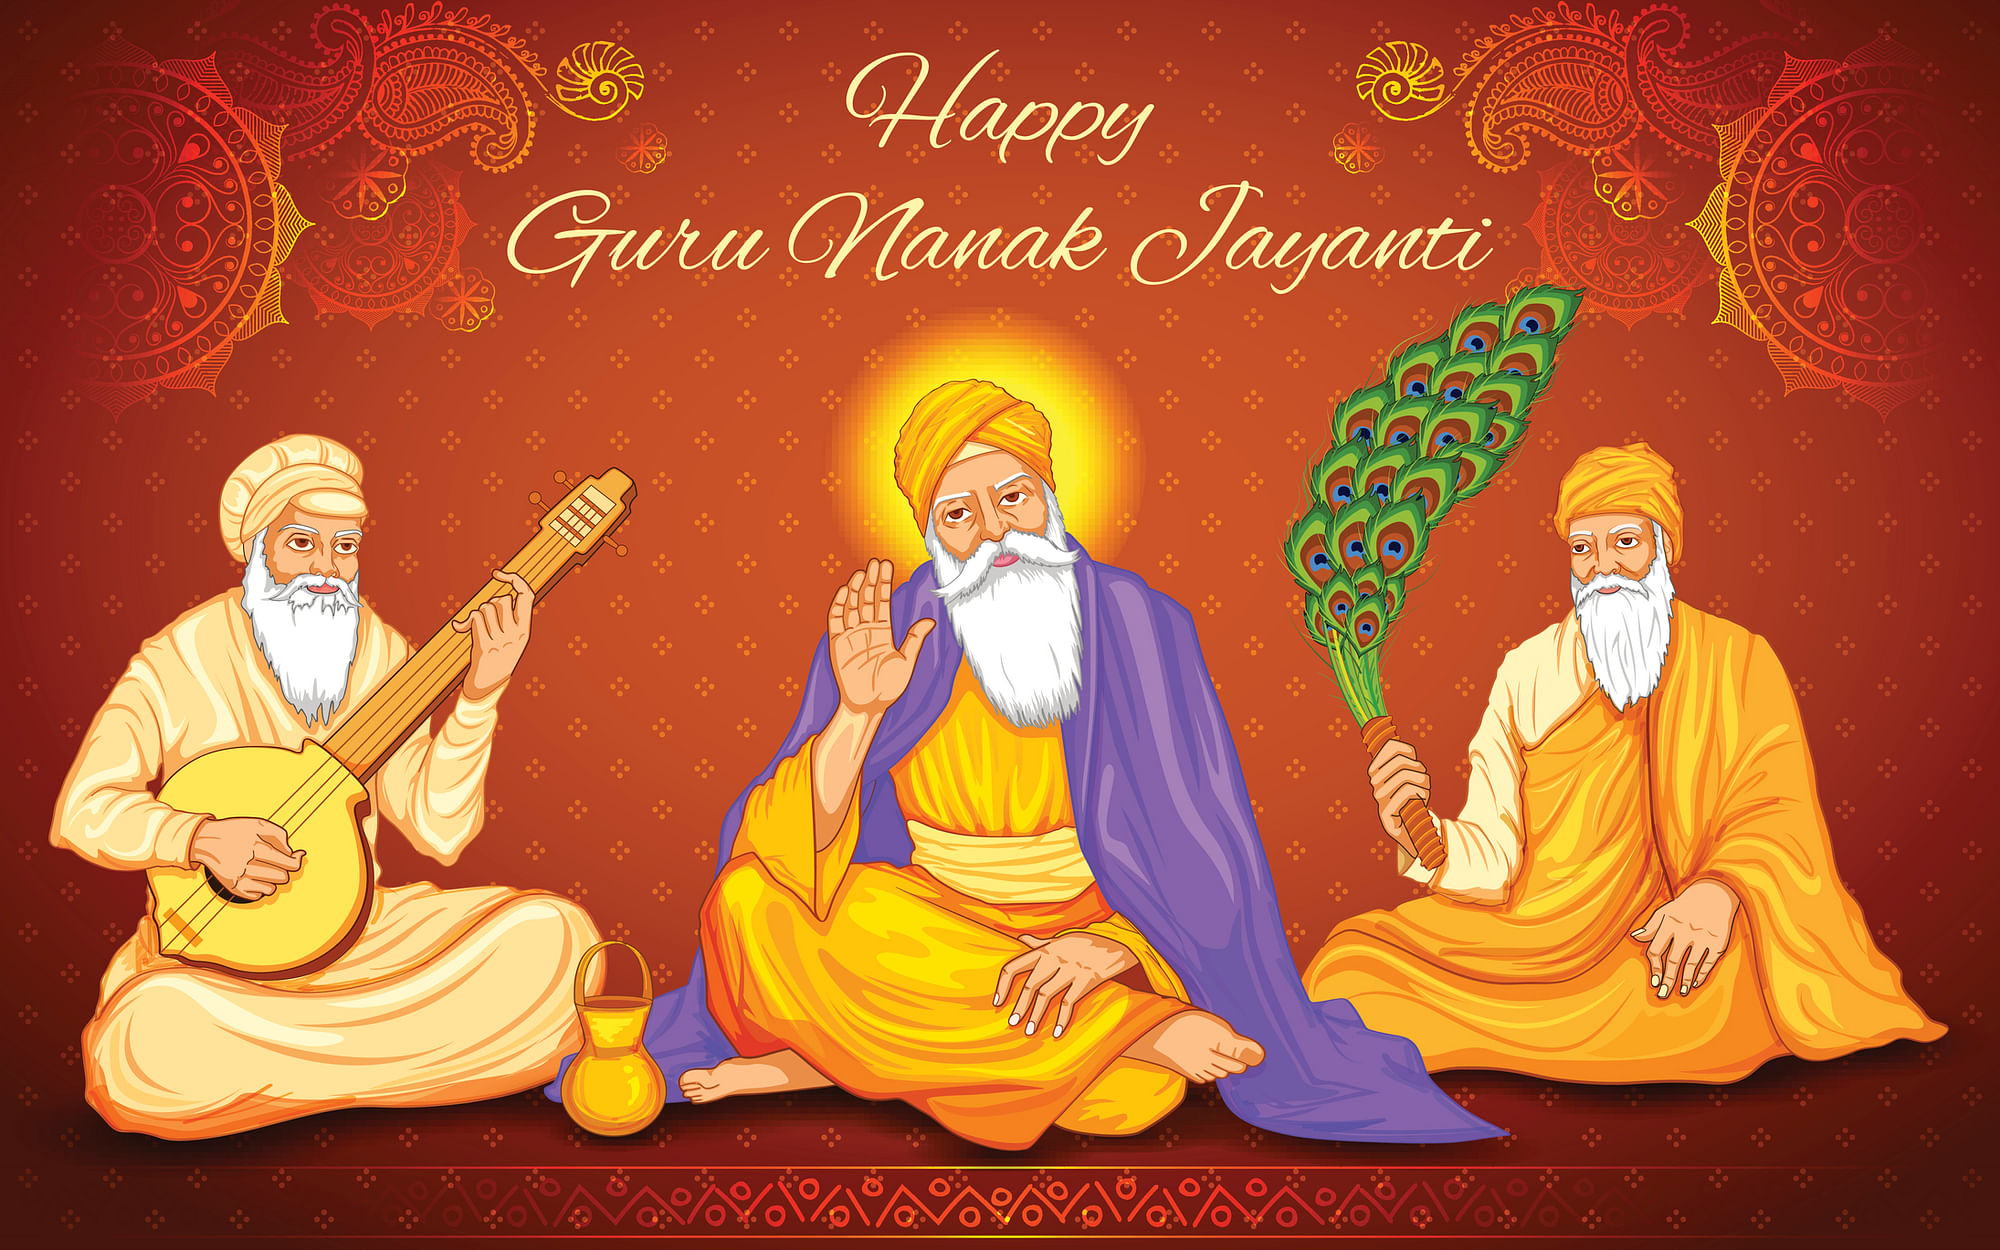 Happy Gurpurab 2020 wishes, quotes, images and greetings.